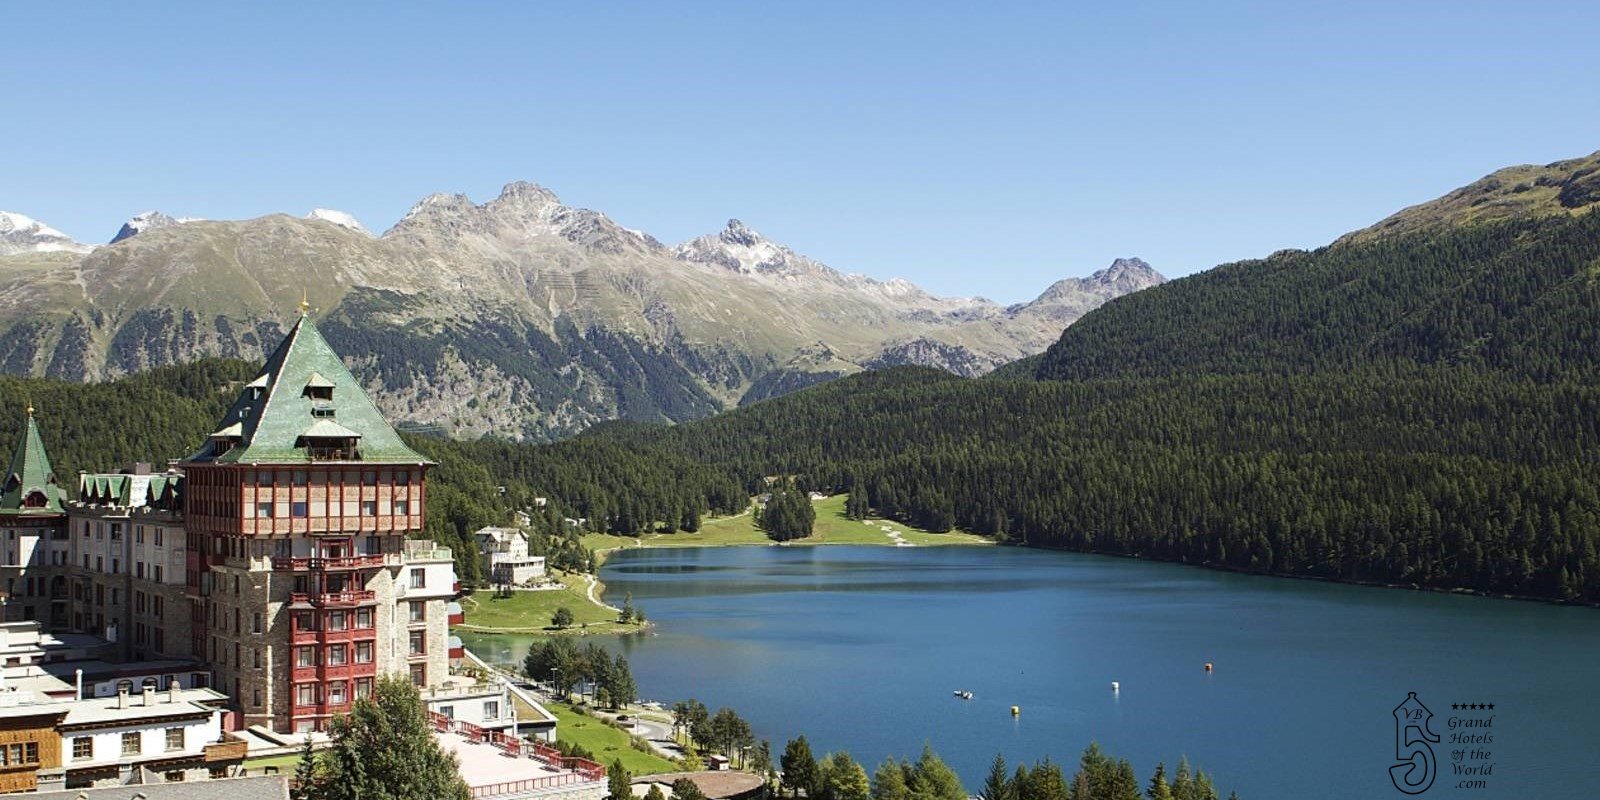 Palace Hotel in St Moritz